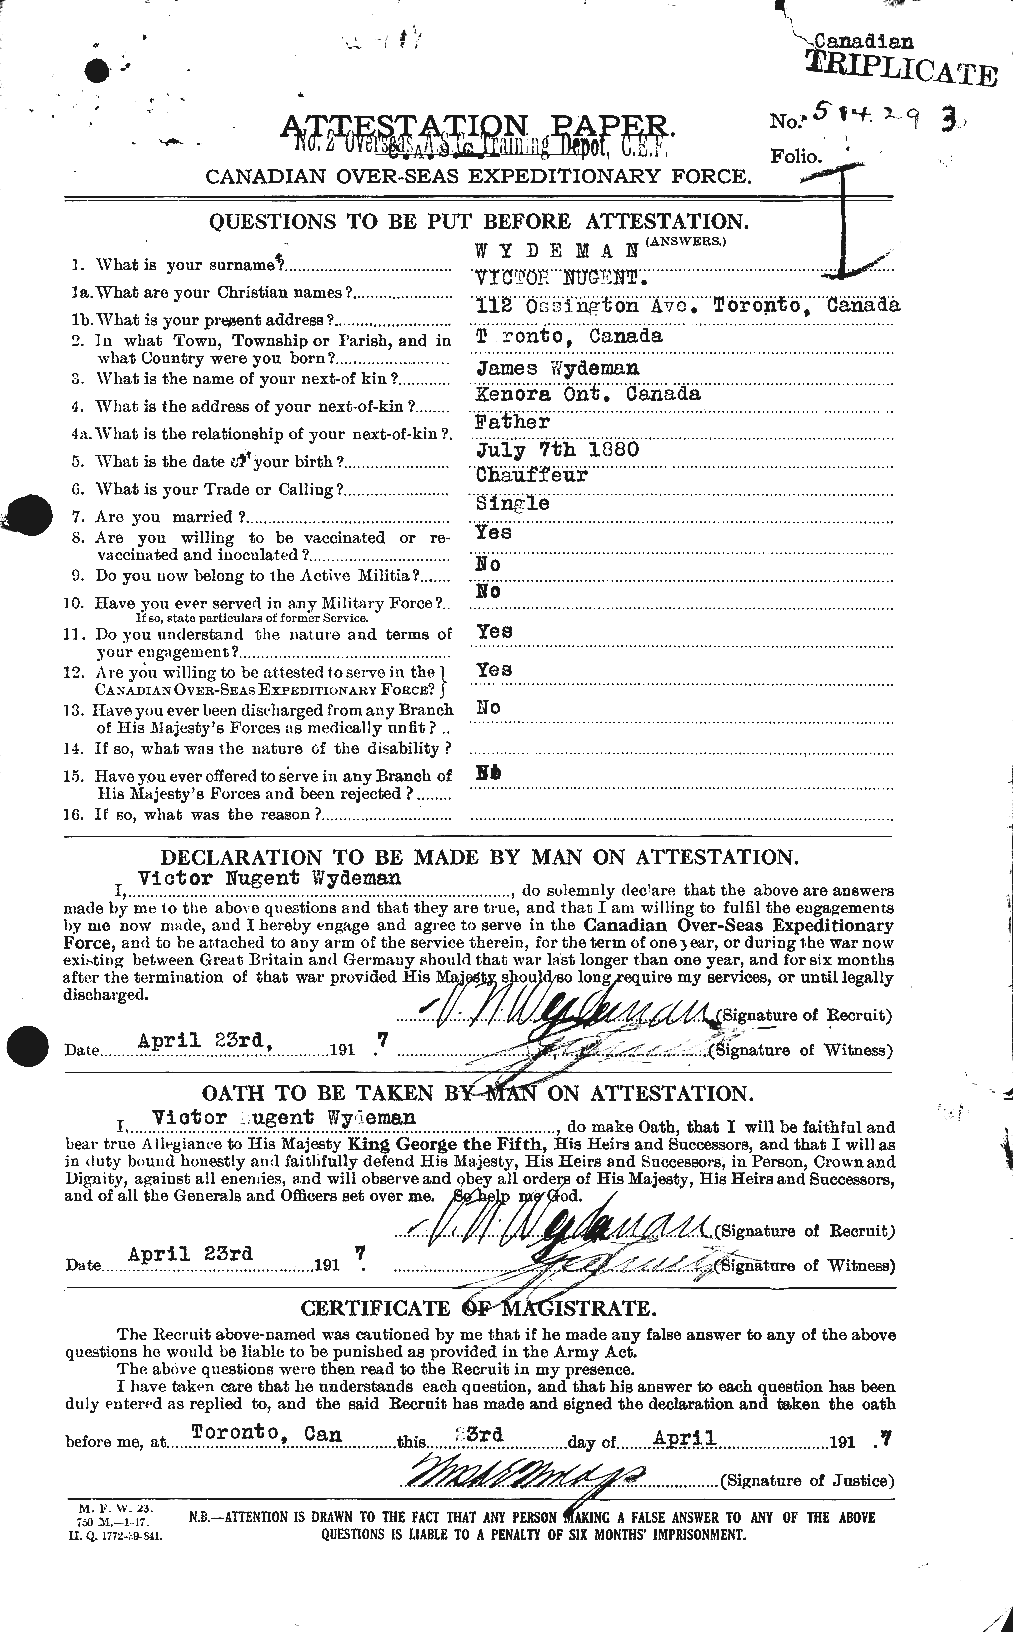 Personnel Records of the First World War - CEF 686606a